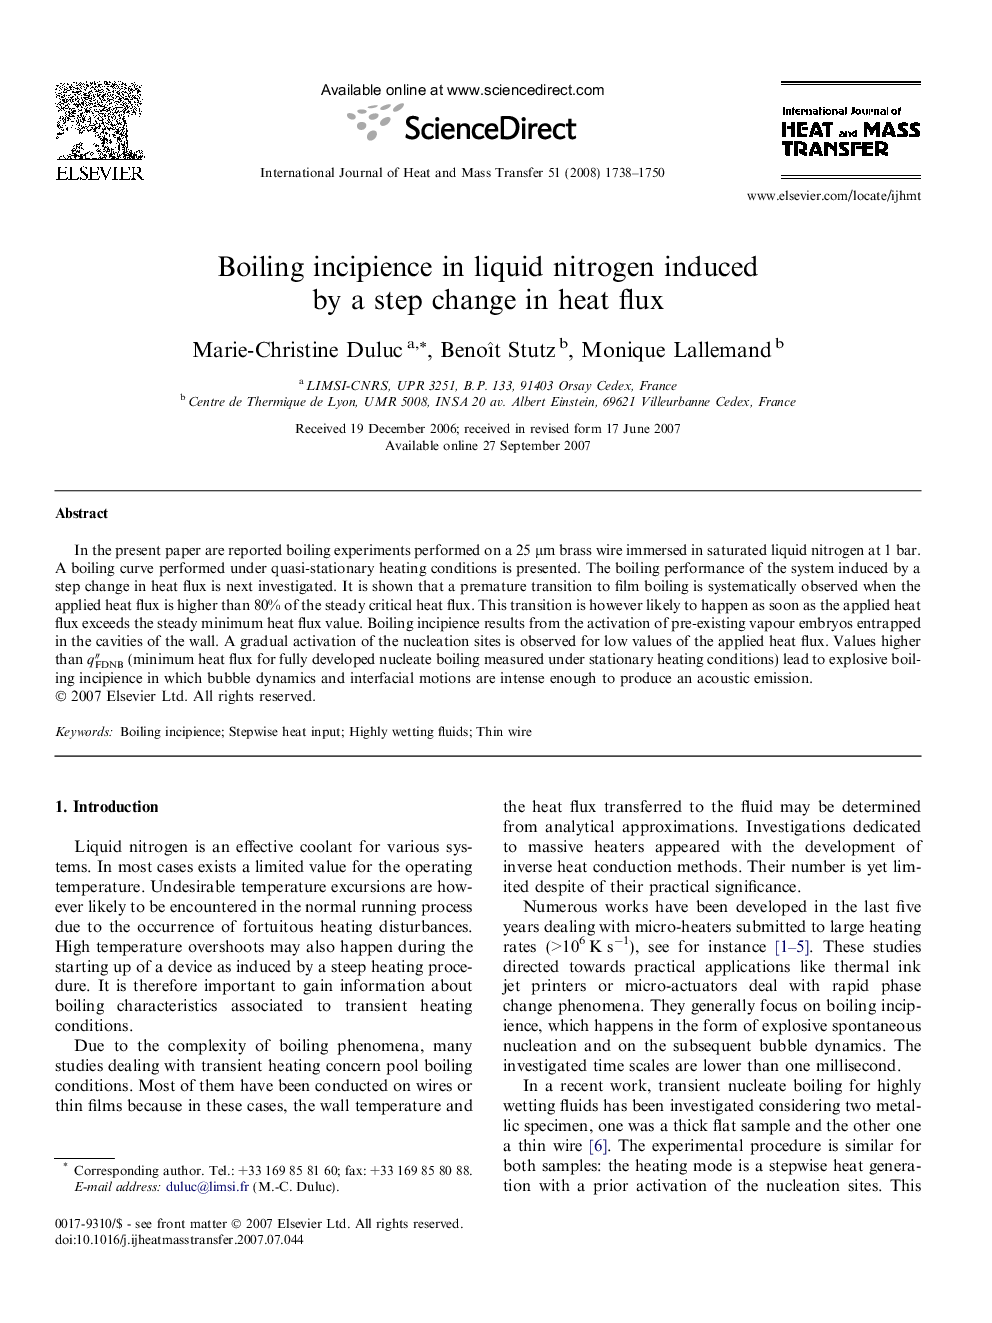 Boiling incipience in liquid nitrogen induced by a step change in heat flux